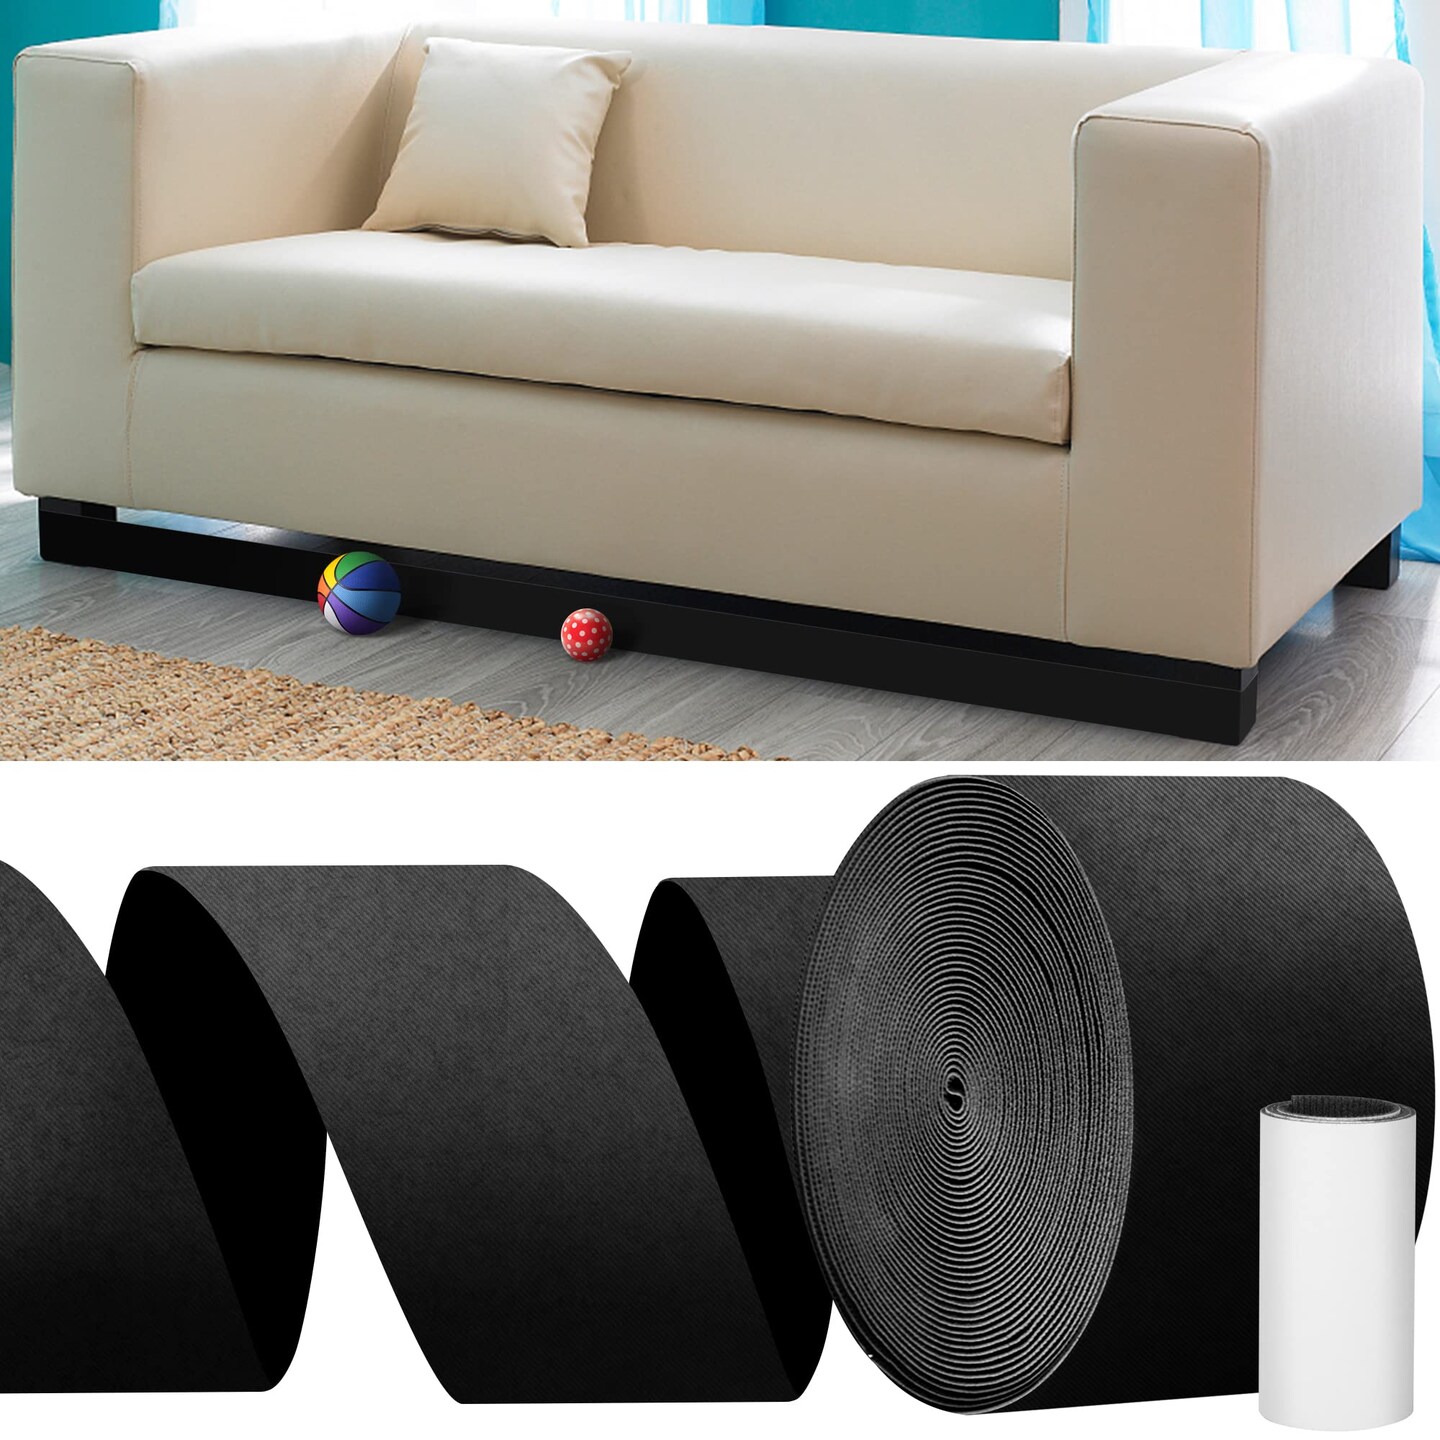 Toy Blockers for Couch with Cylindrical Legs under Couch Blocker